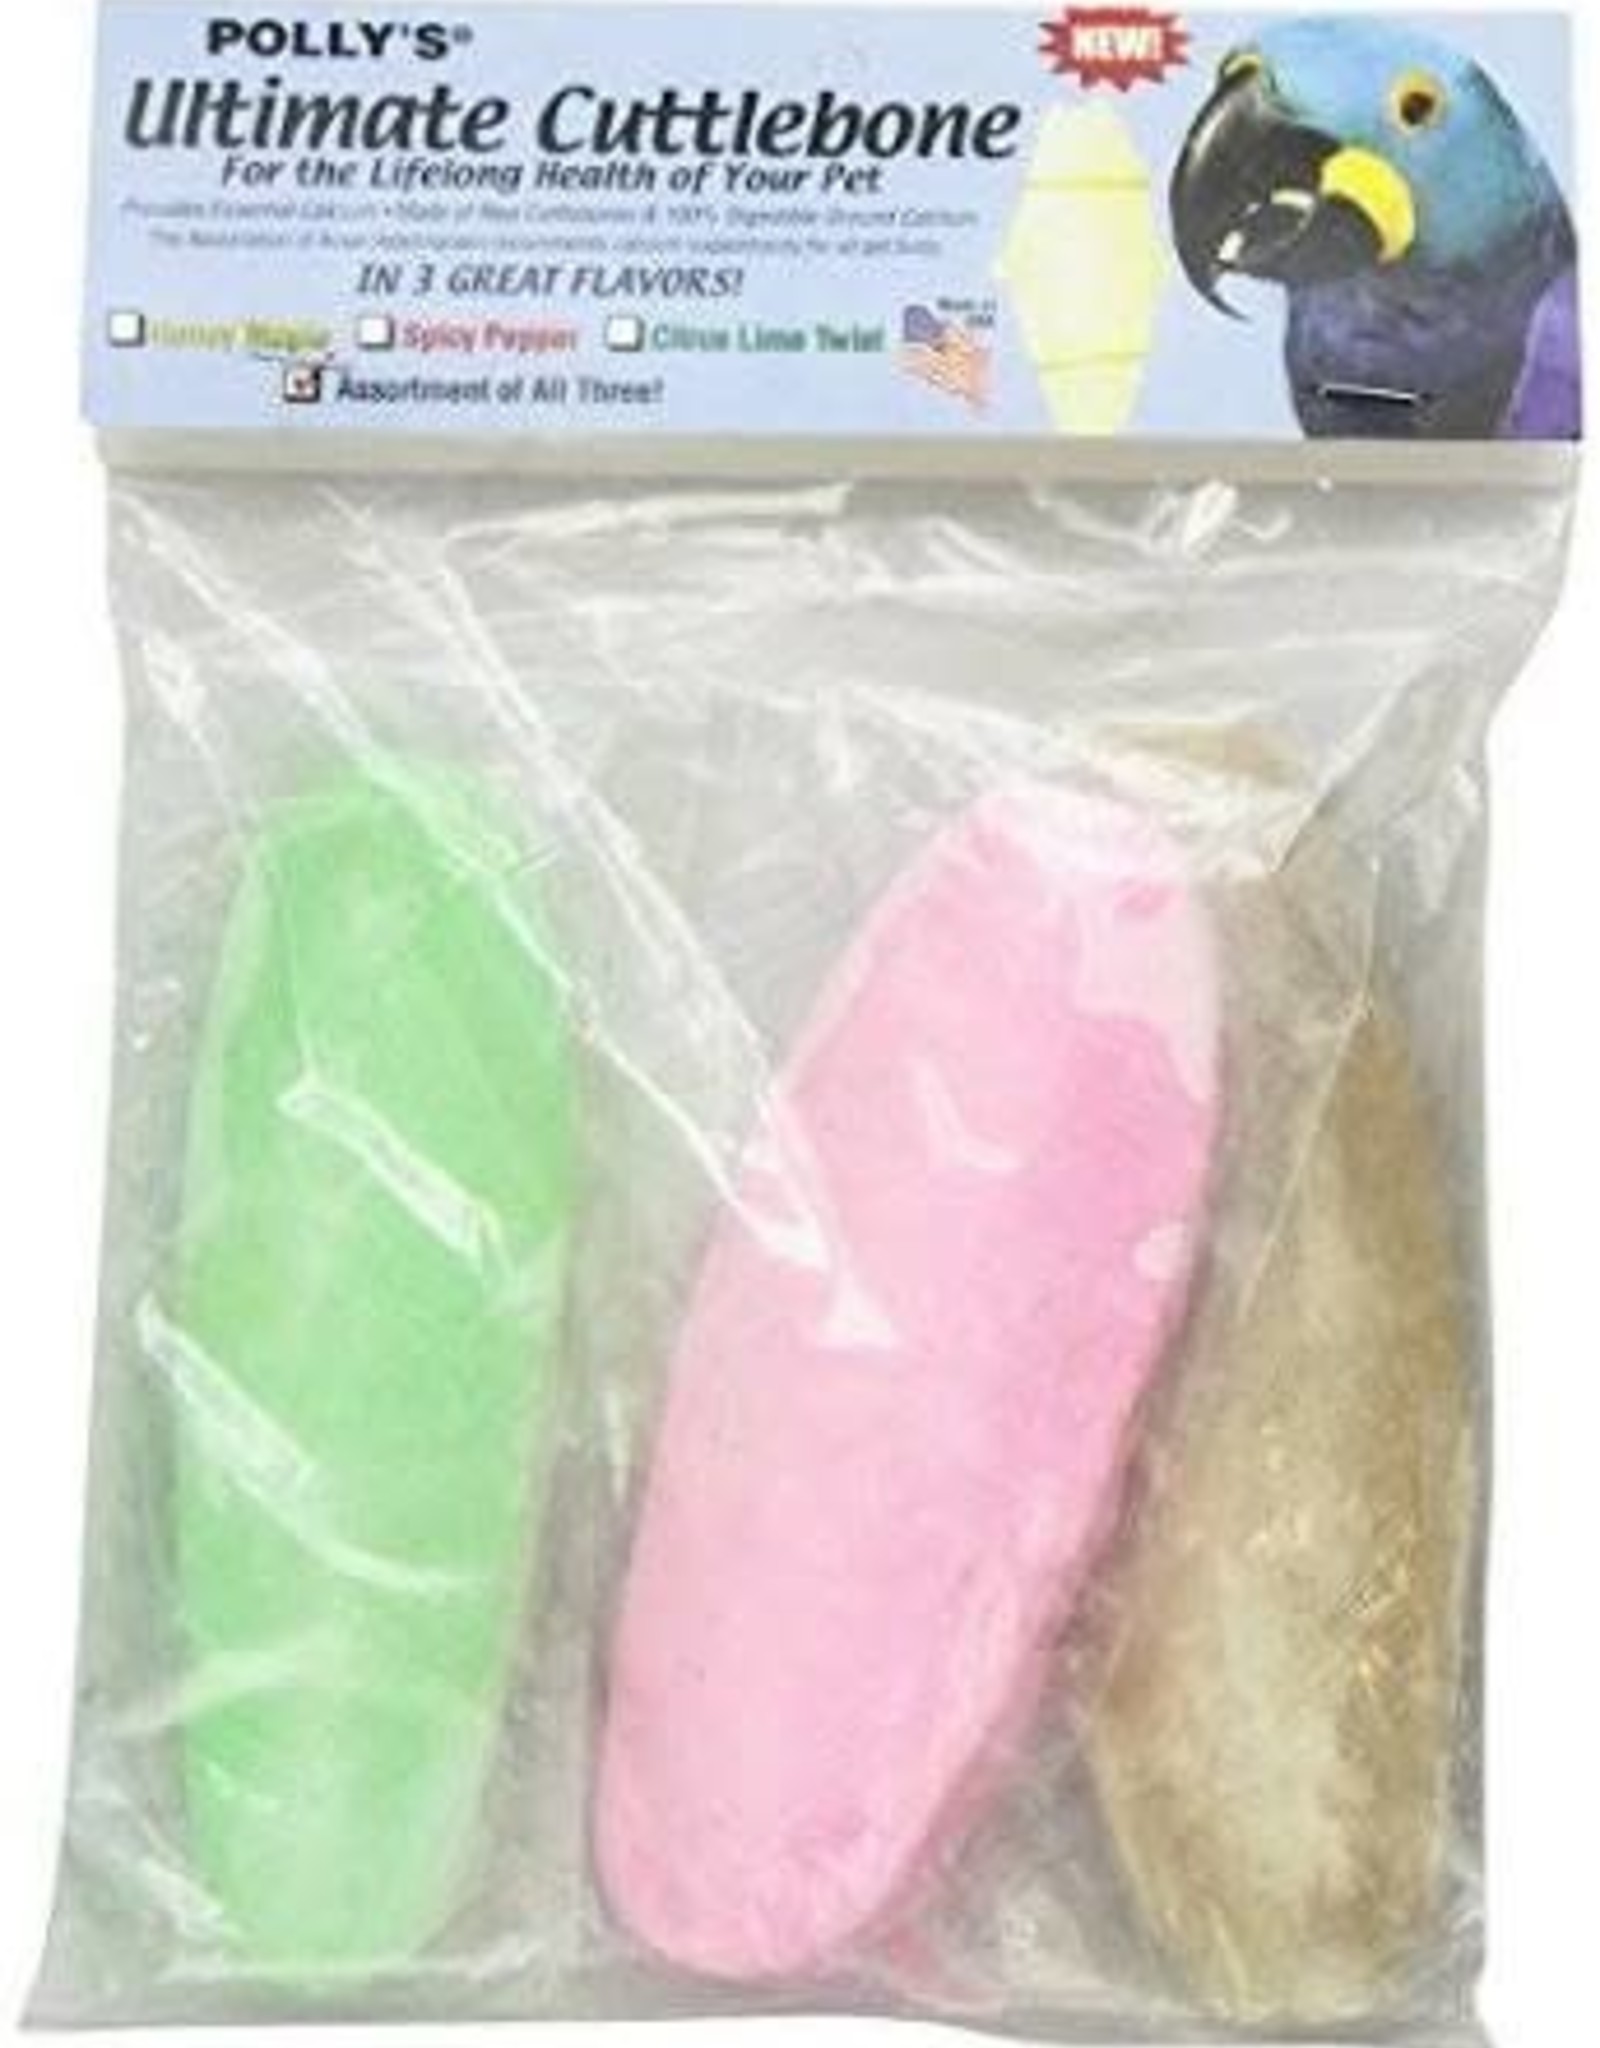 POLLY'S PET PRODUCTS INC PPP 50928- ULTIMATE CUTTLEBONE- 3 PK ASSORTED*